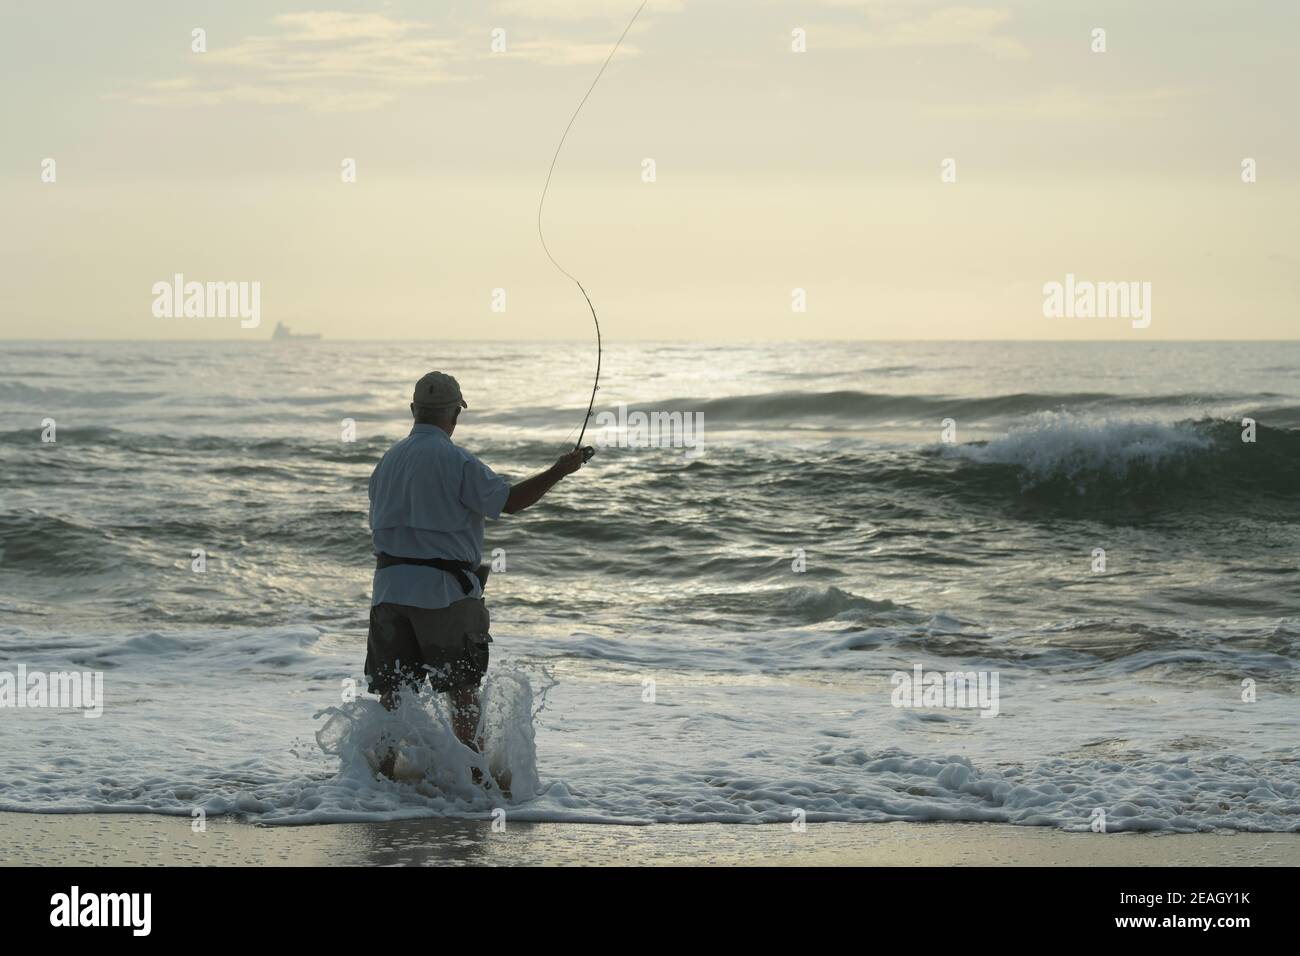 Fly fishing, people, sport, single adult man casting lure into sea